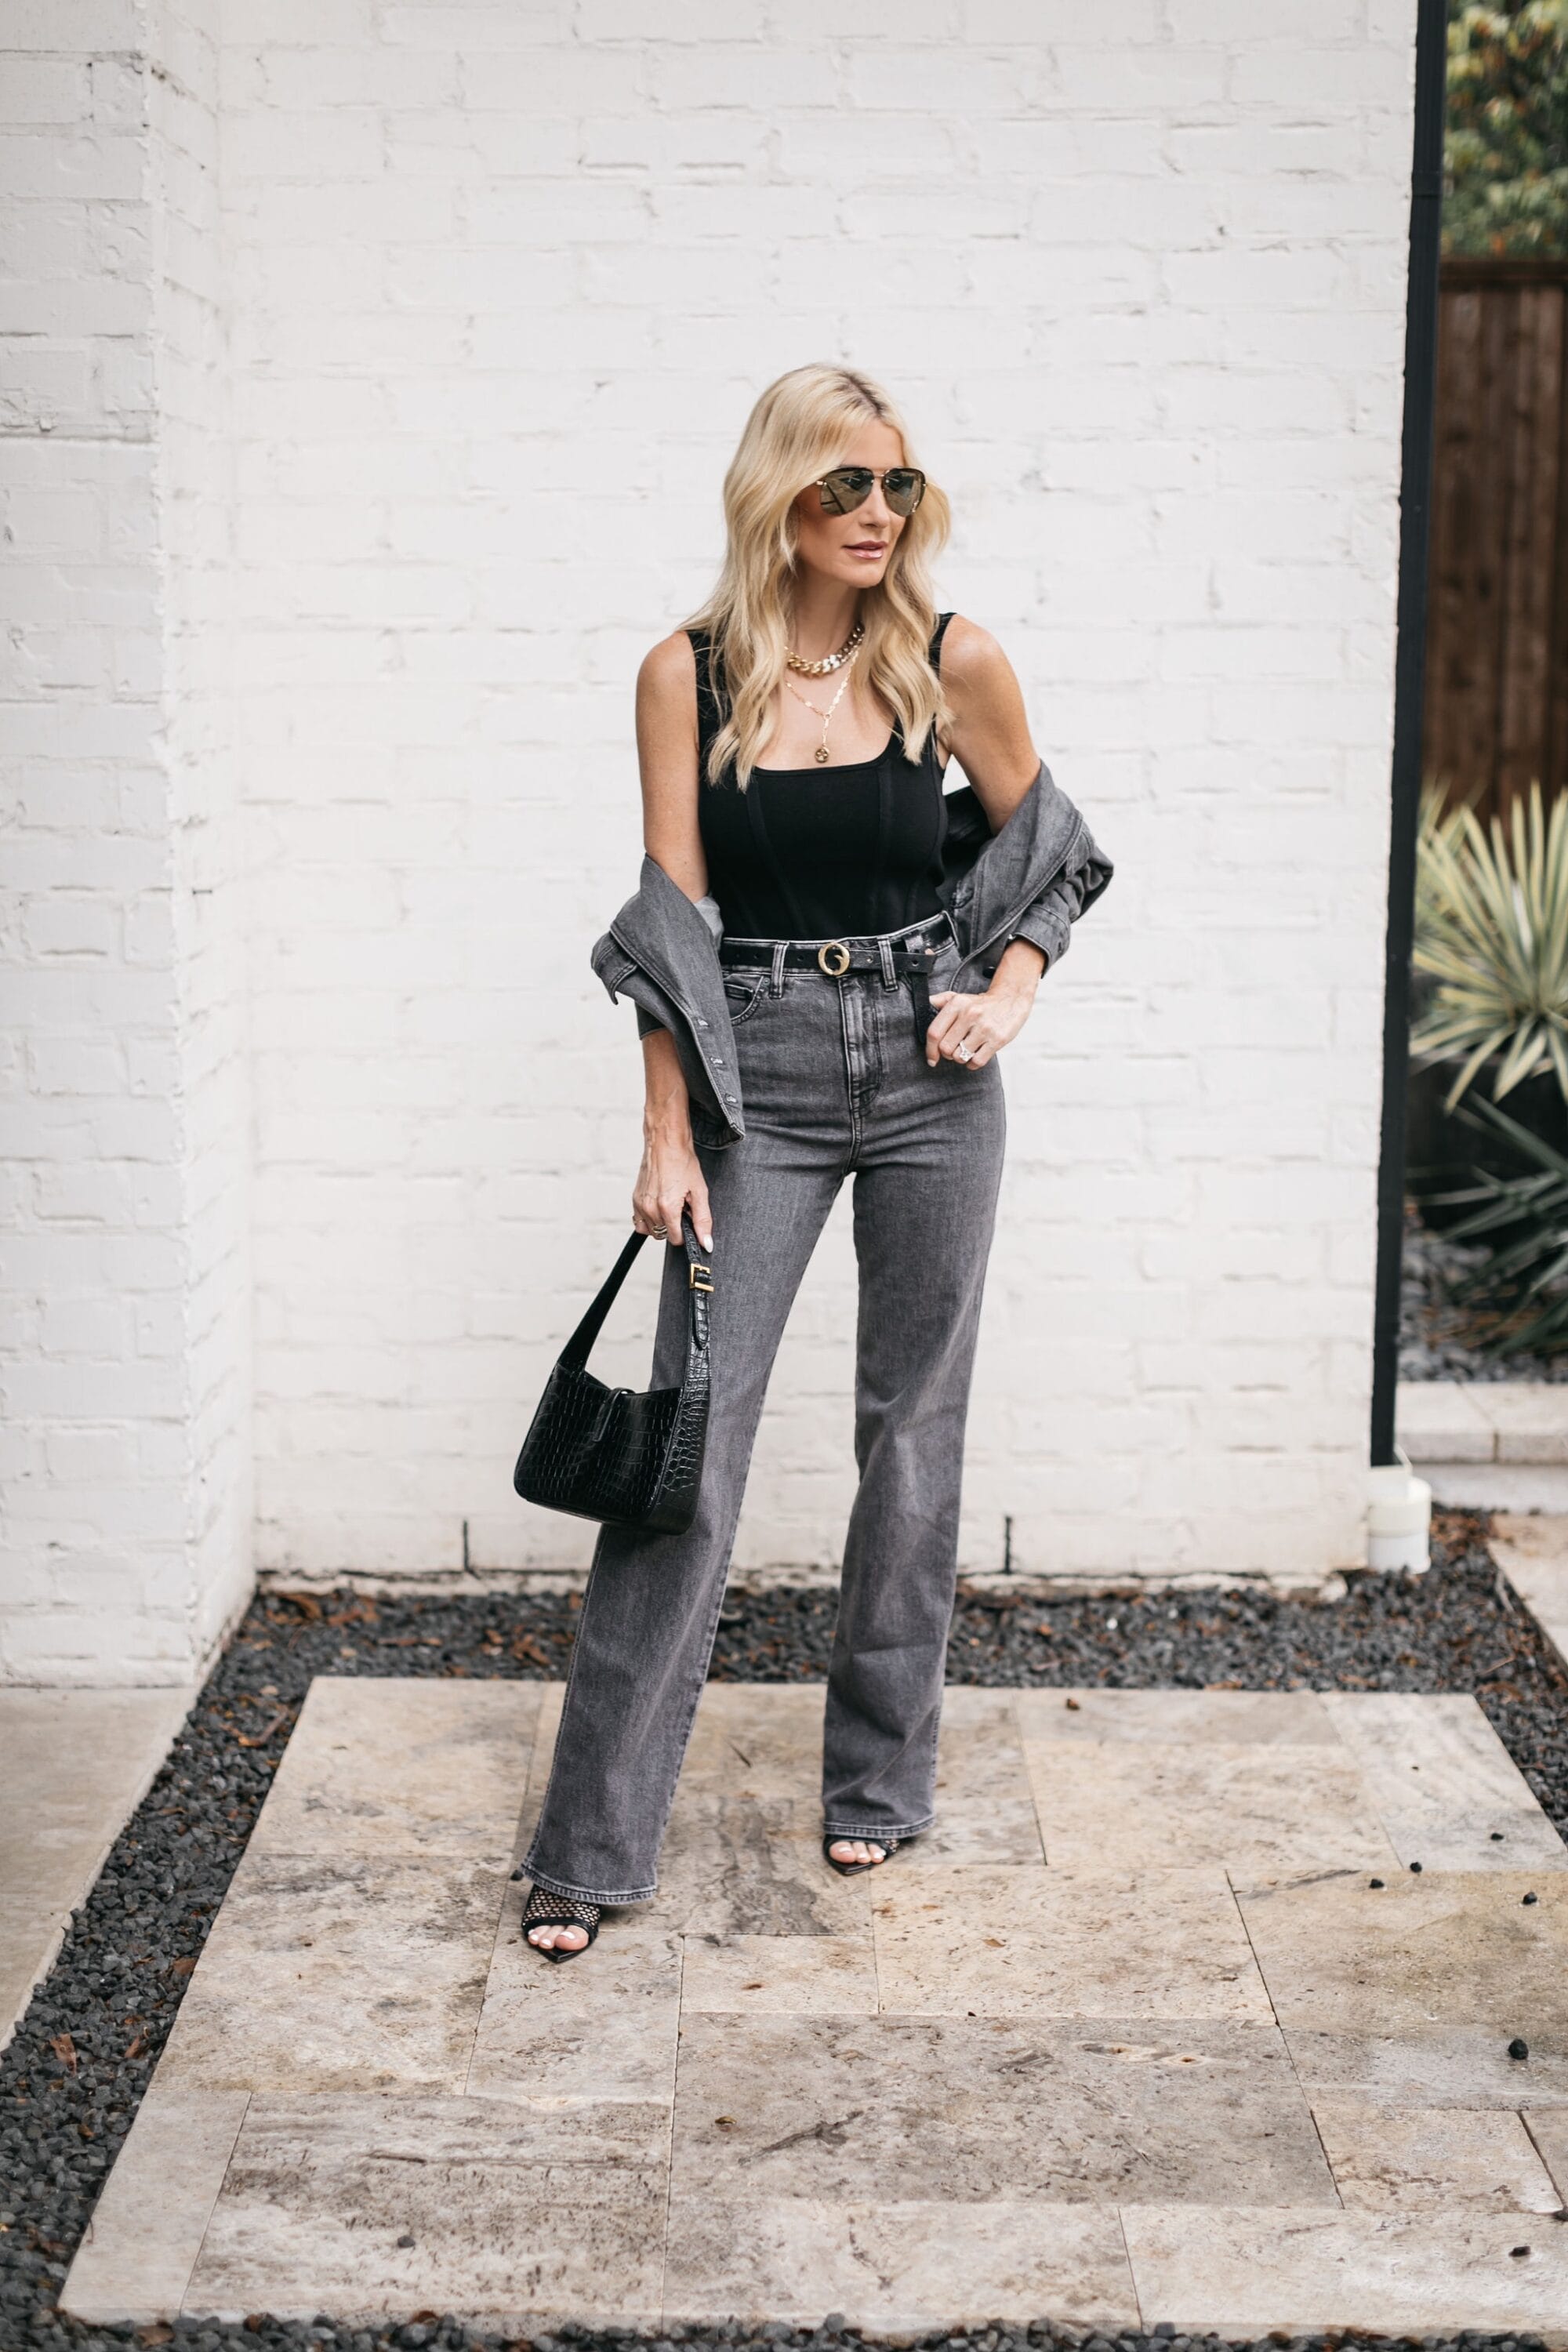 Dallas fashion blogger wearing Clinch belt with express X Simon Spurr collab denim as example of luxury pieces worth the investment.